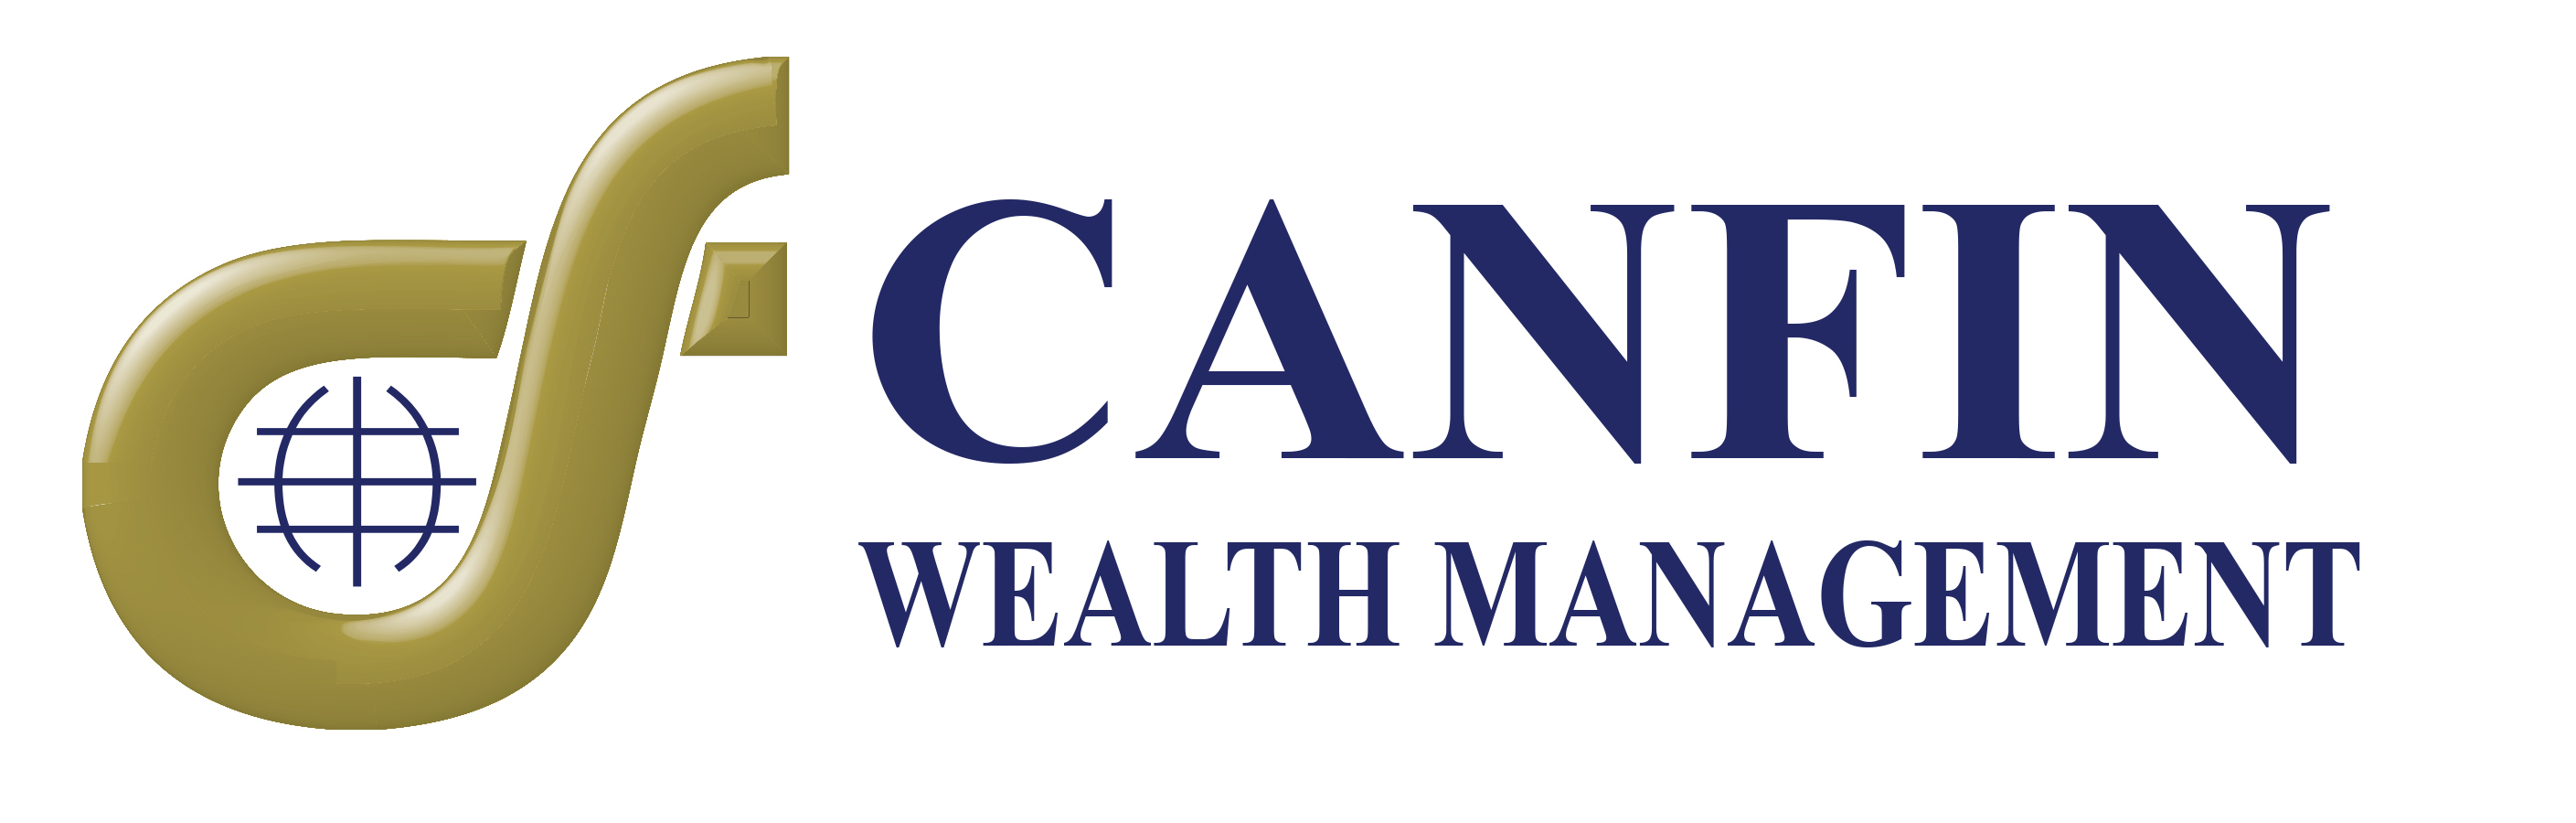 George Tey - CANFIN Financial Group - Logo